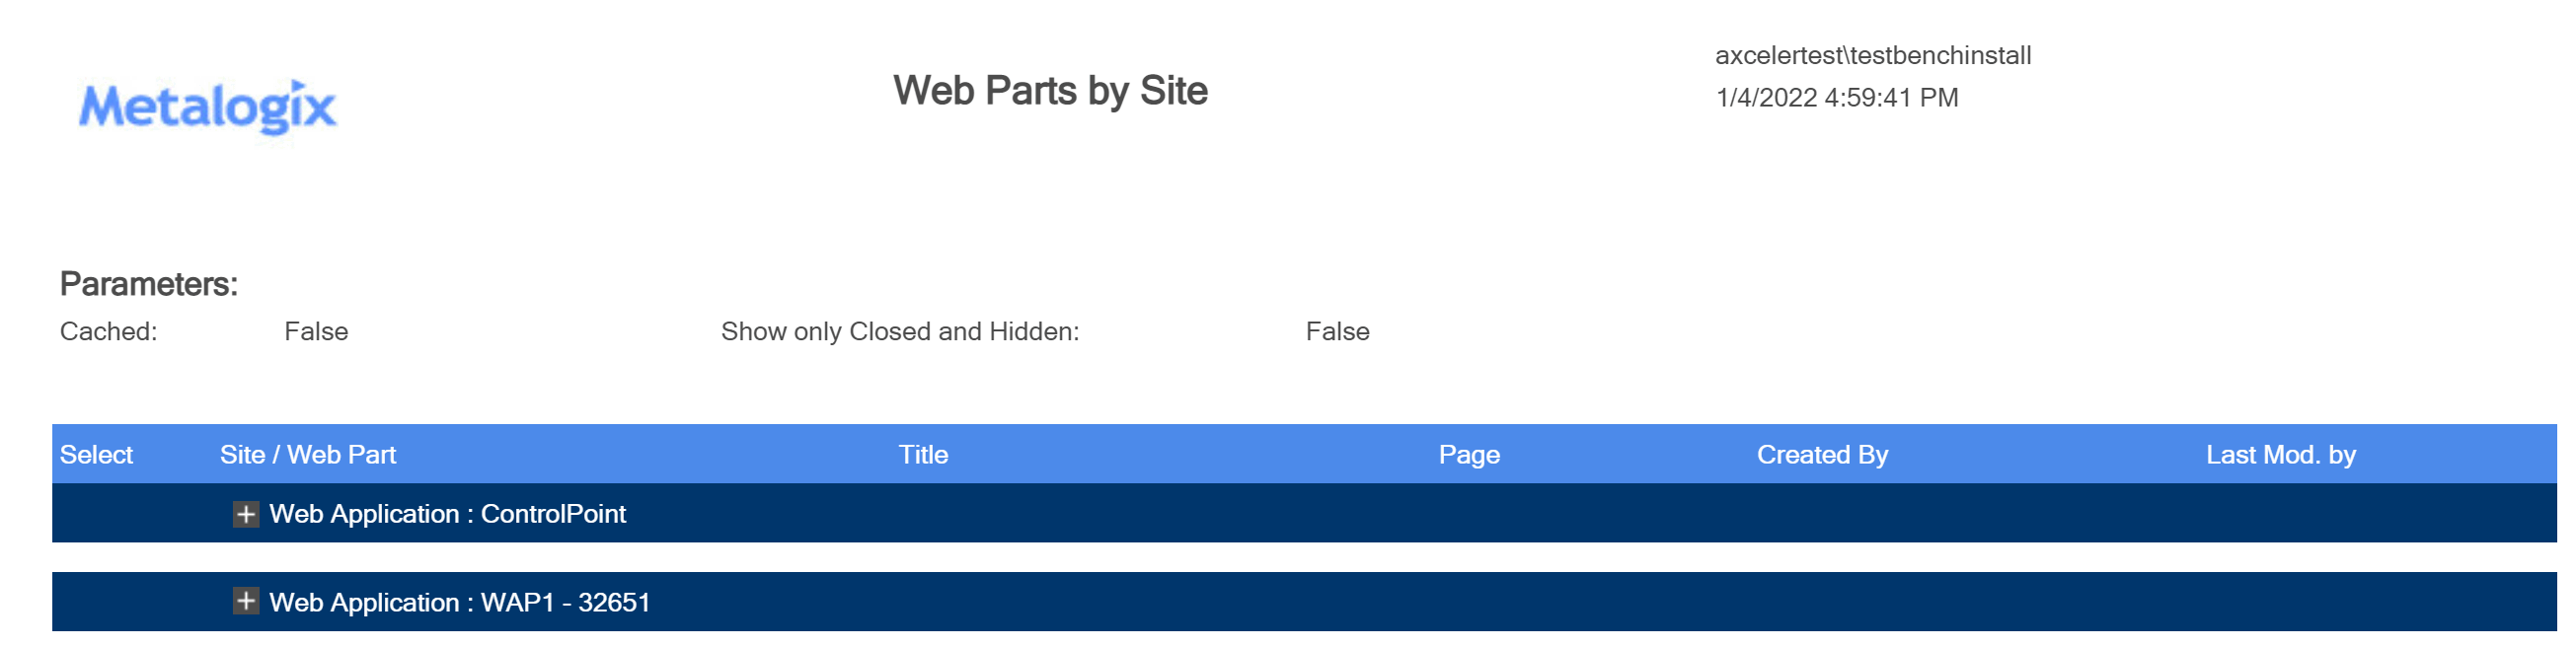 Web Parts by Site RESULTS